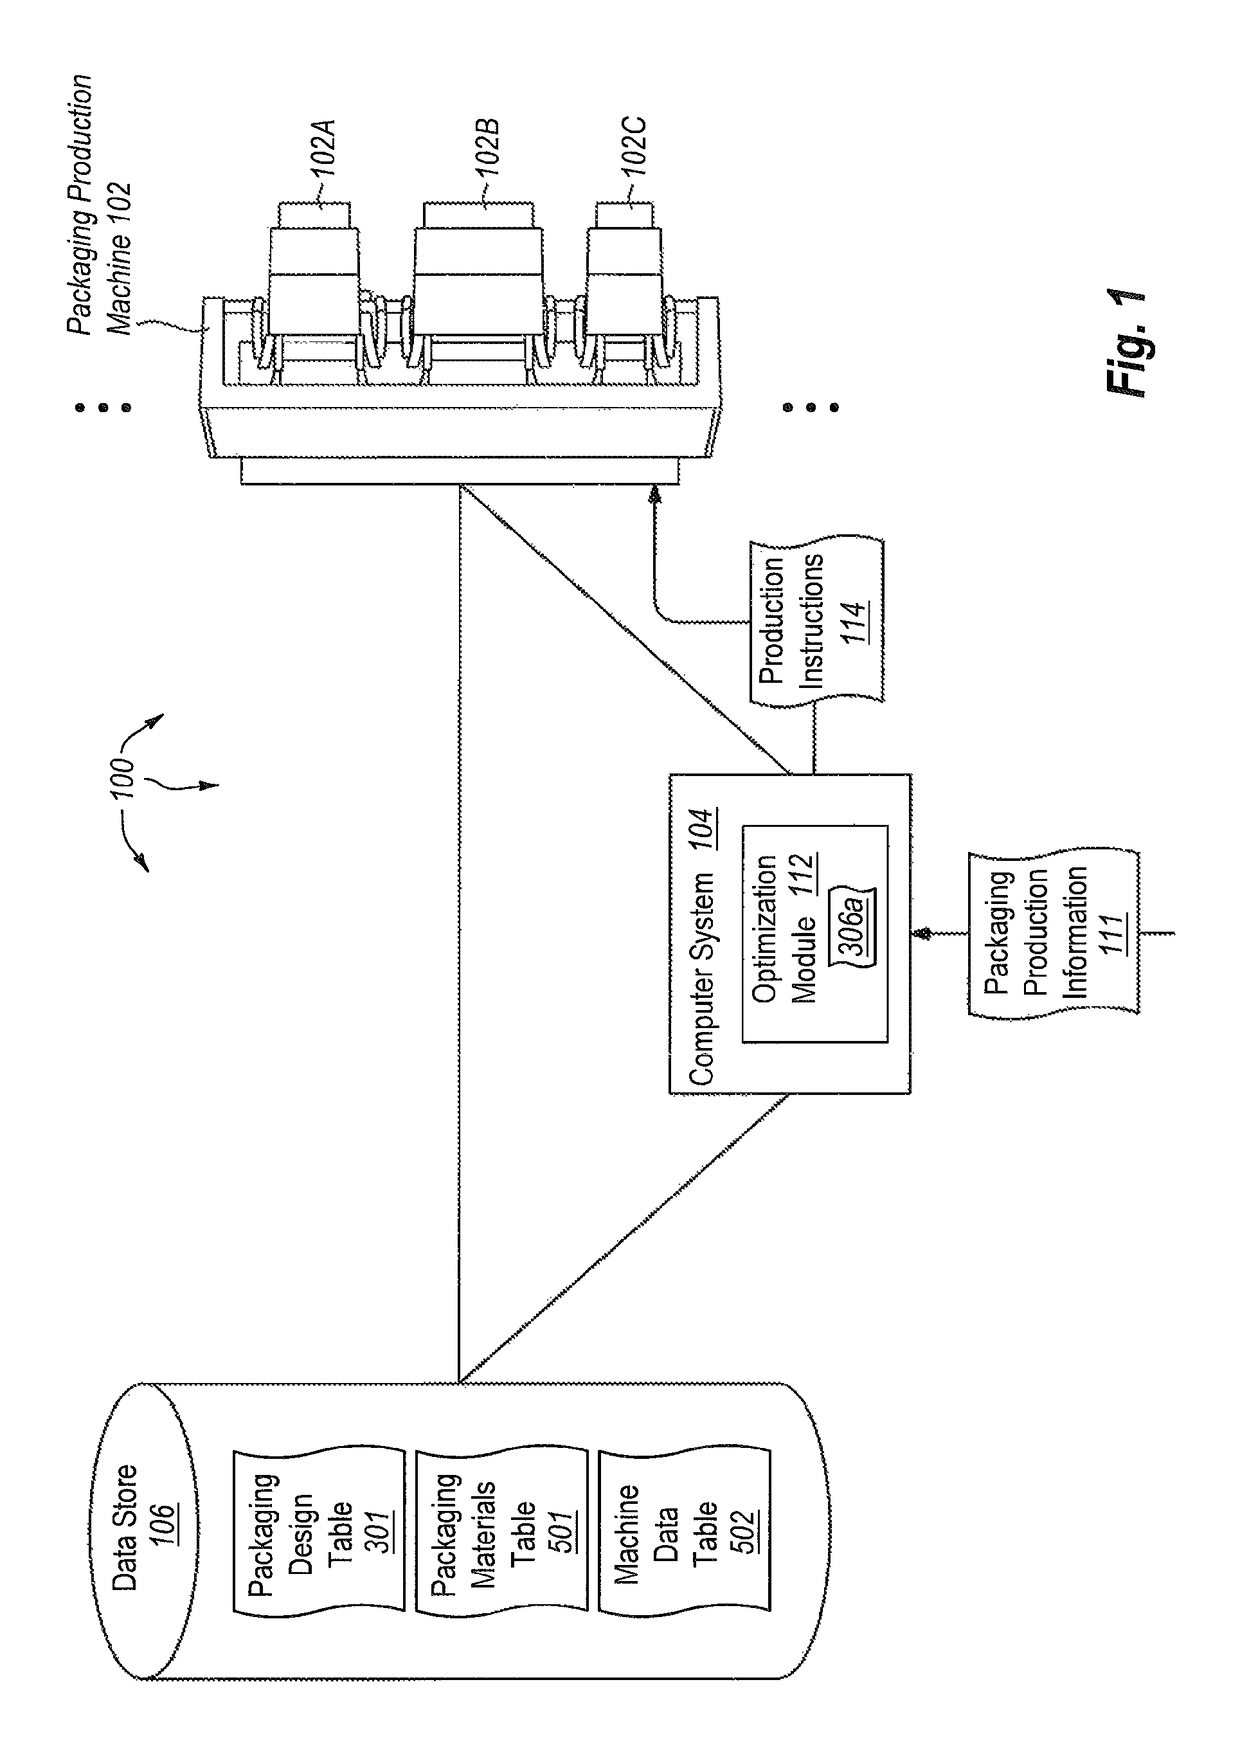 Systems and methods for optimizing production of packaging products